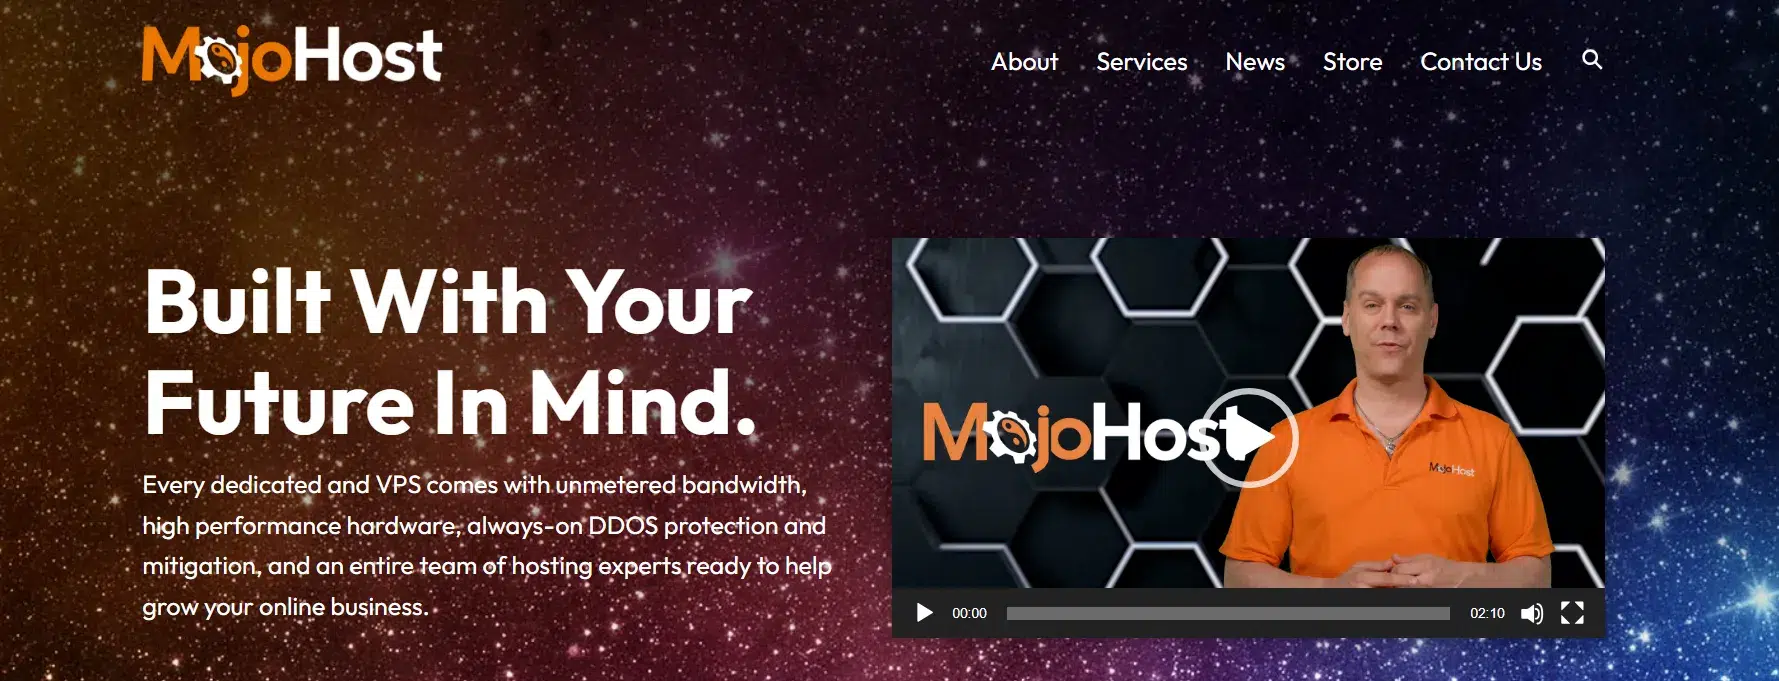 Mojohost Review